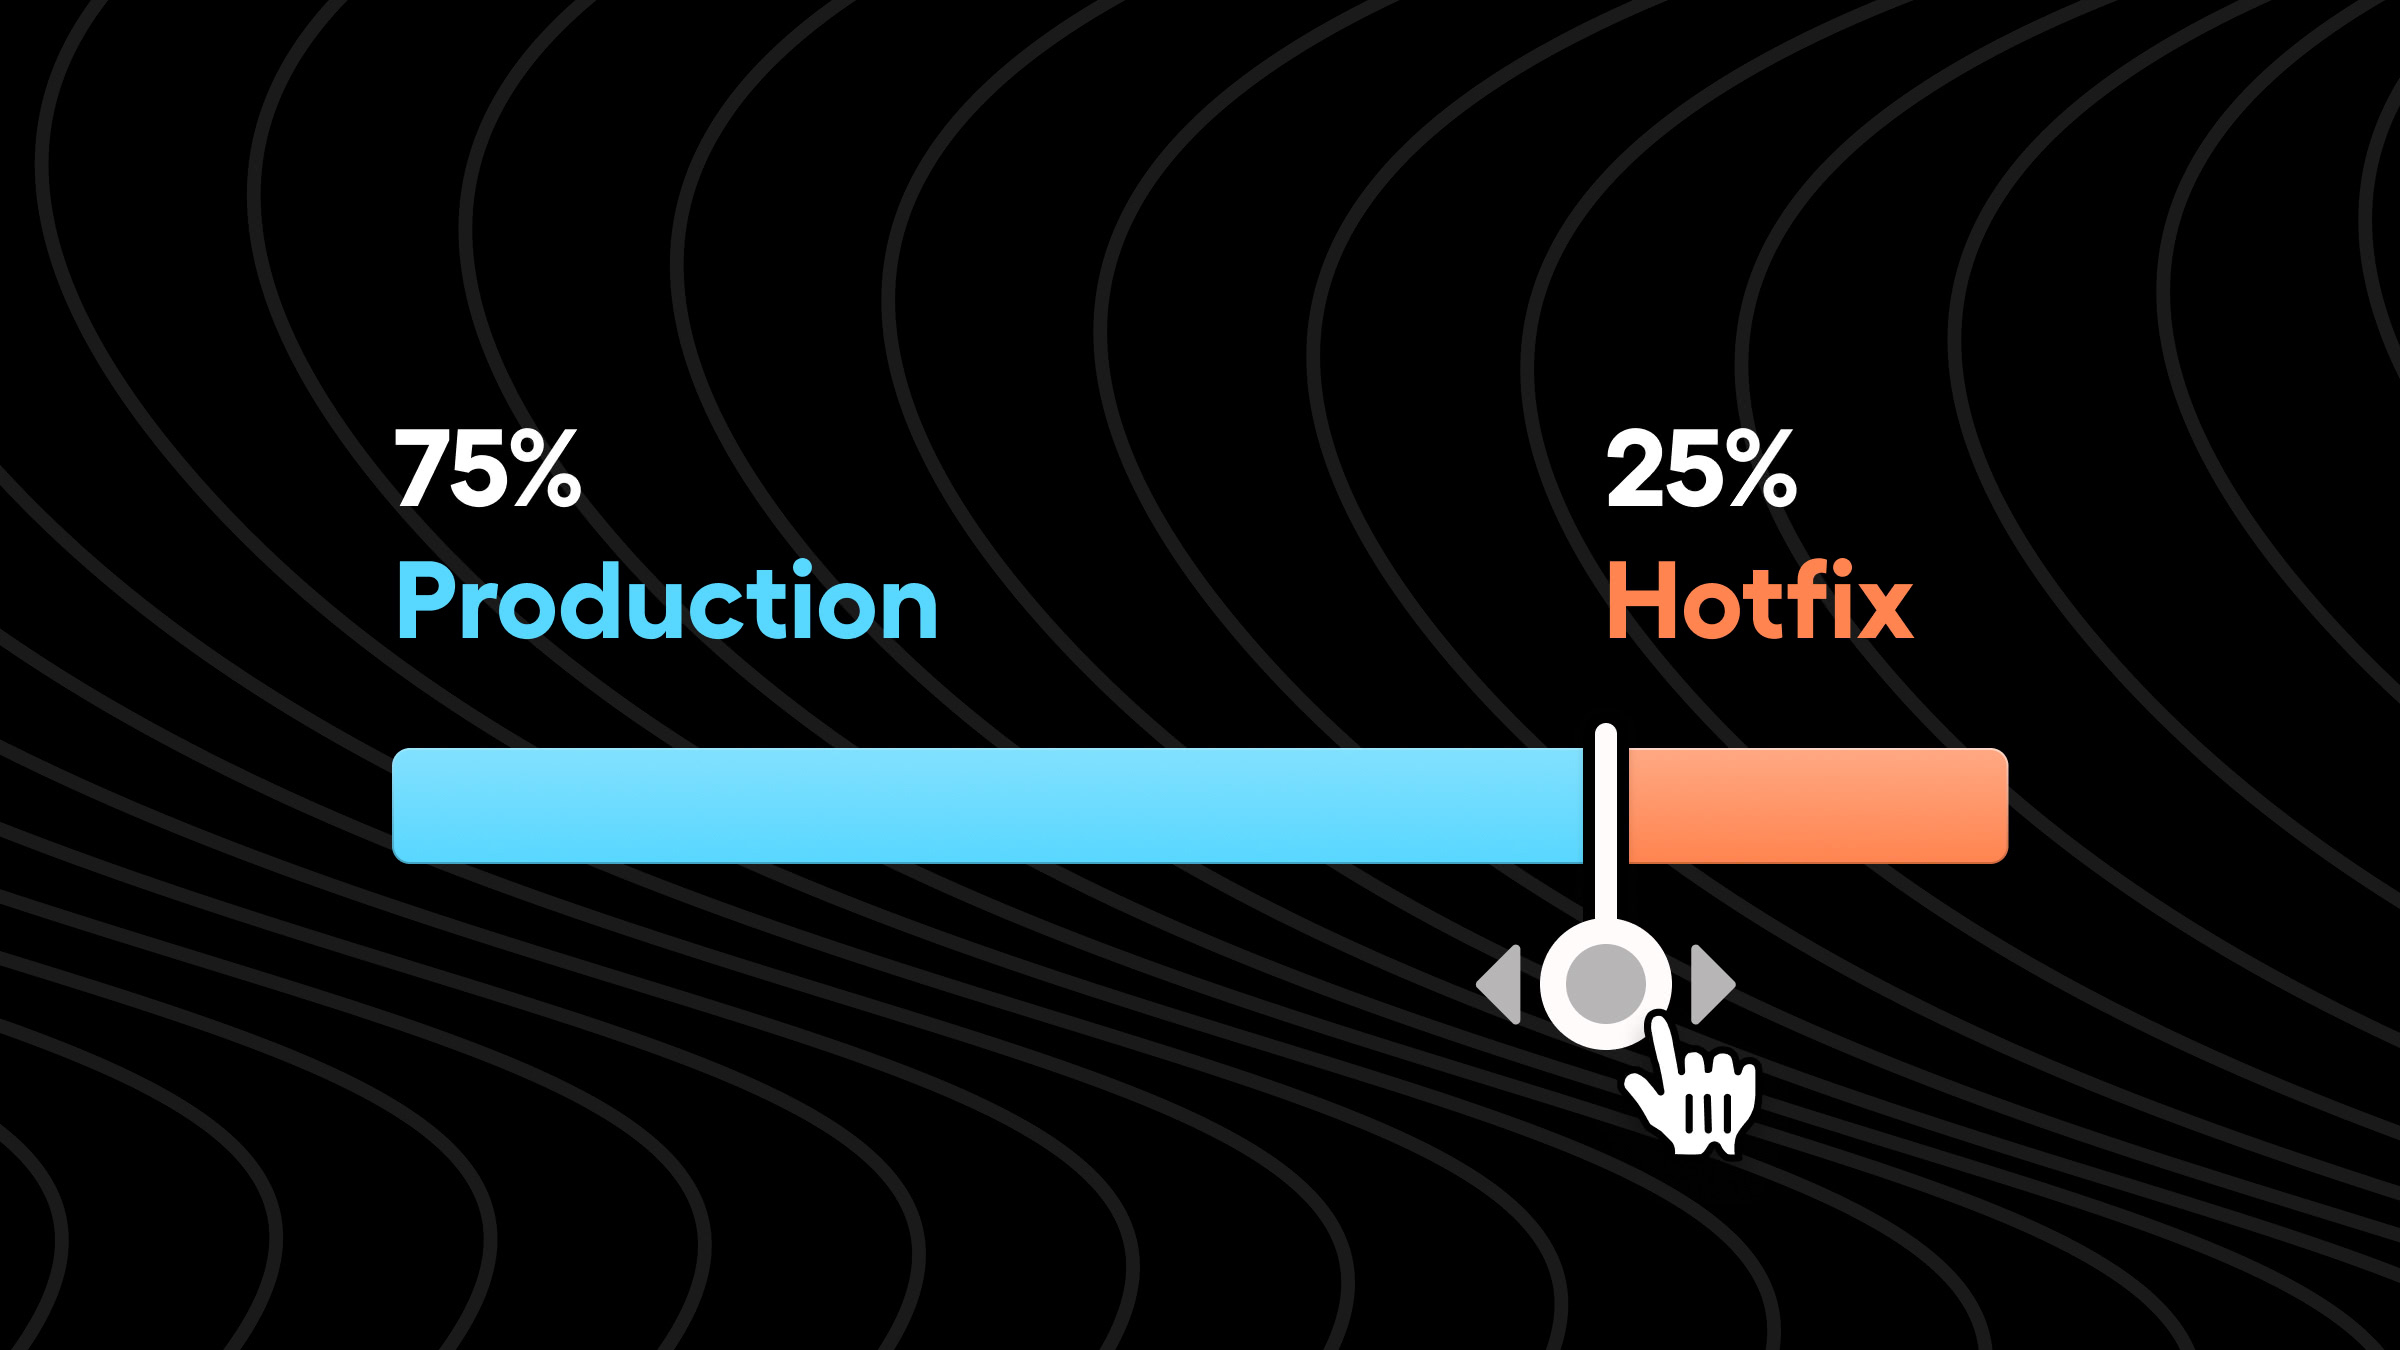 A slider showing 75% of users on the production branch and 25% of users on the hotfix branch.